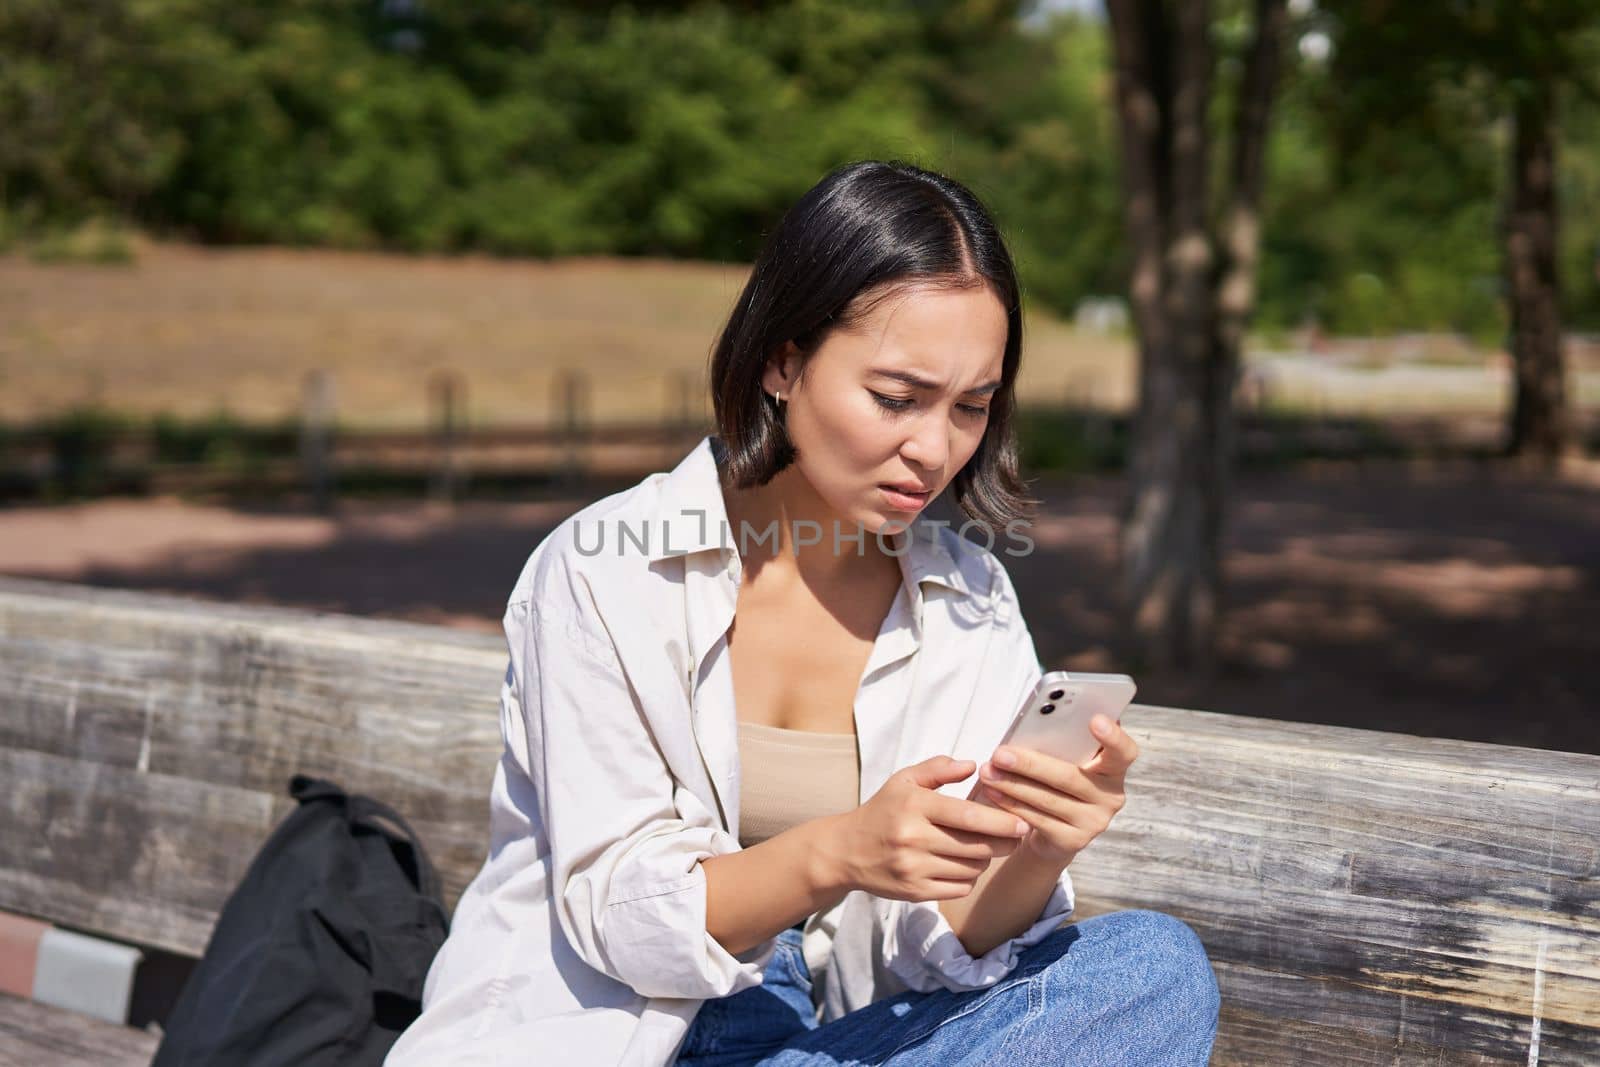 Asian girl frowning, looking concerned at her mobile phone, reading sad message, bad news on smartphone app, sitting on bench in park worrying.